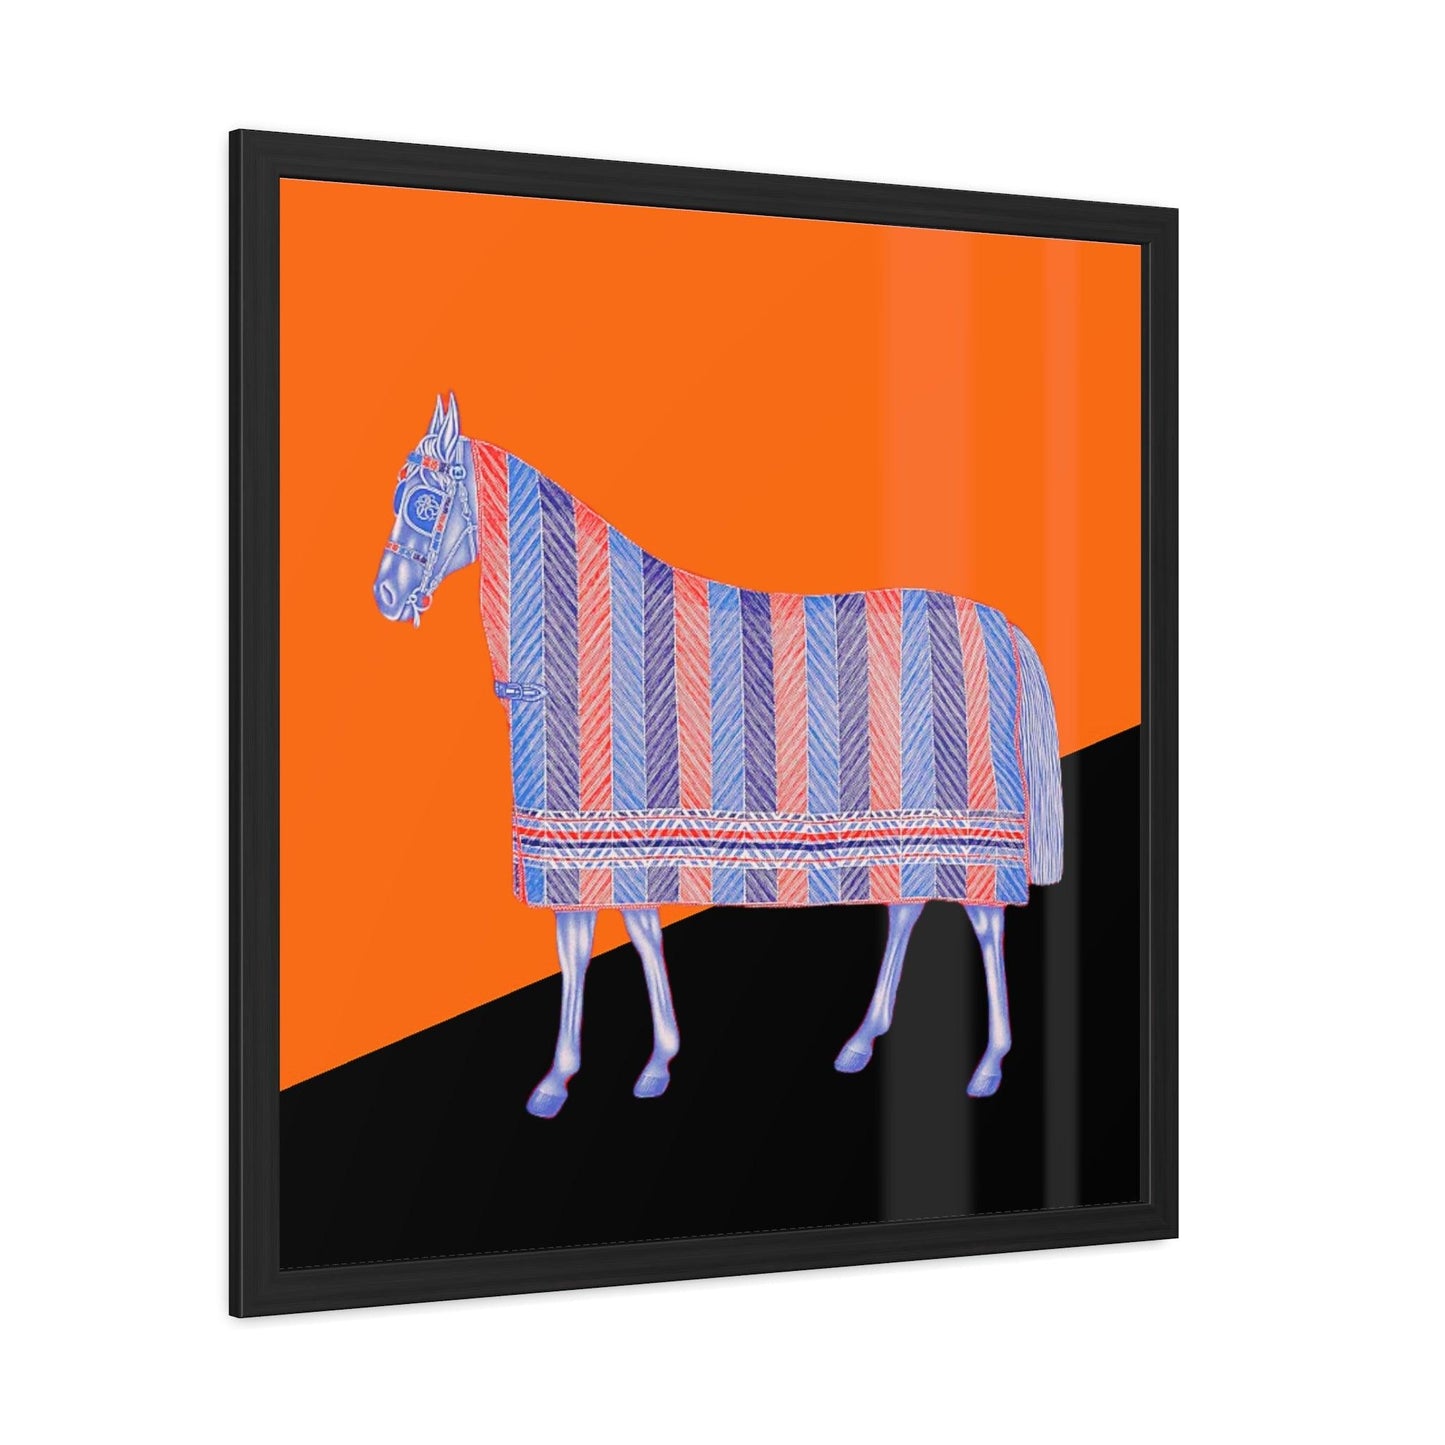 House of Horse Framed Poster Wall Art House of Horse Framed Poster Wall Art House of Horse Framed Poster Wall Art 